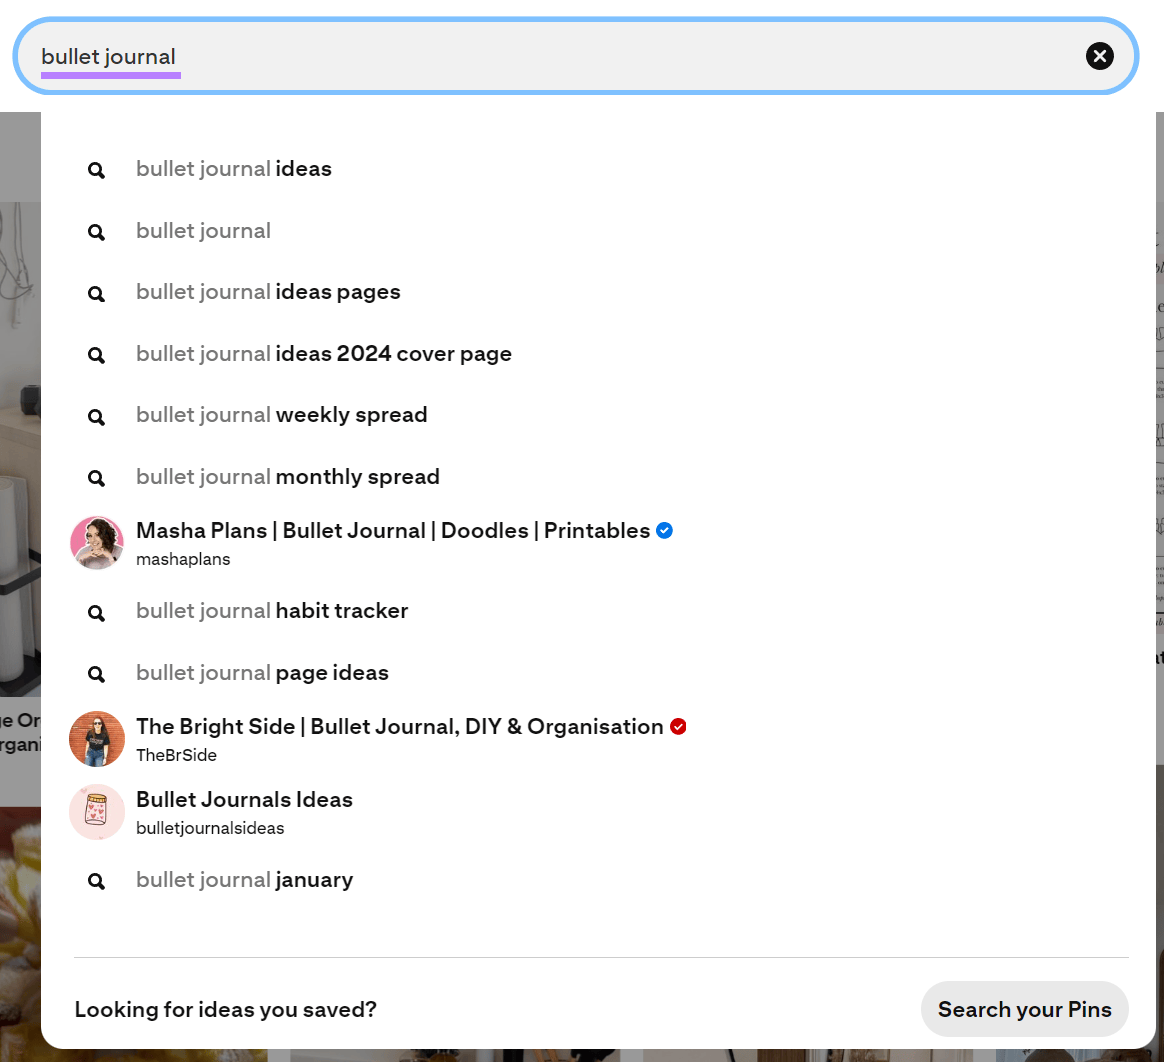 Pinterest search bar with related terms for the search keyword “bullet journal.”